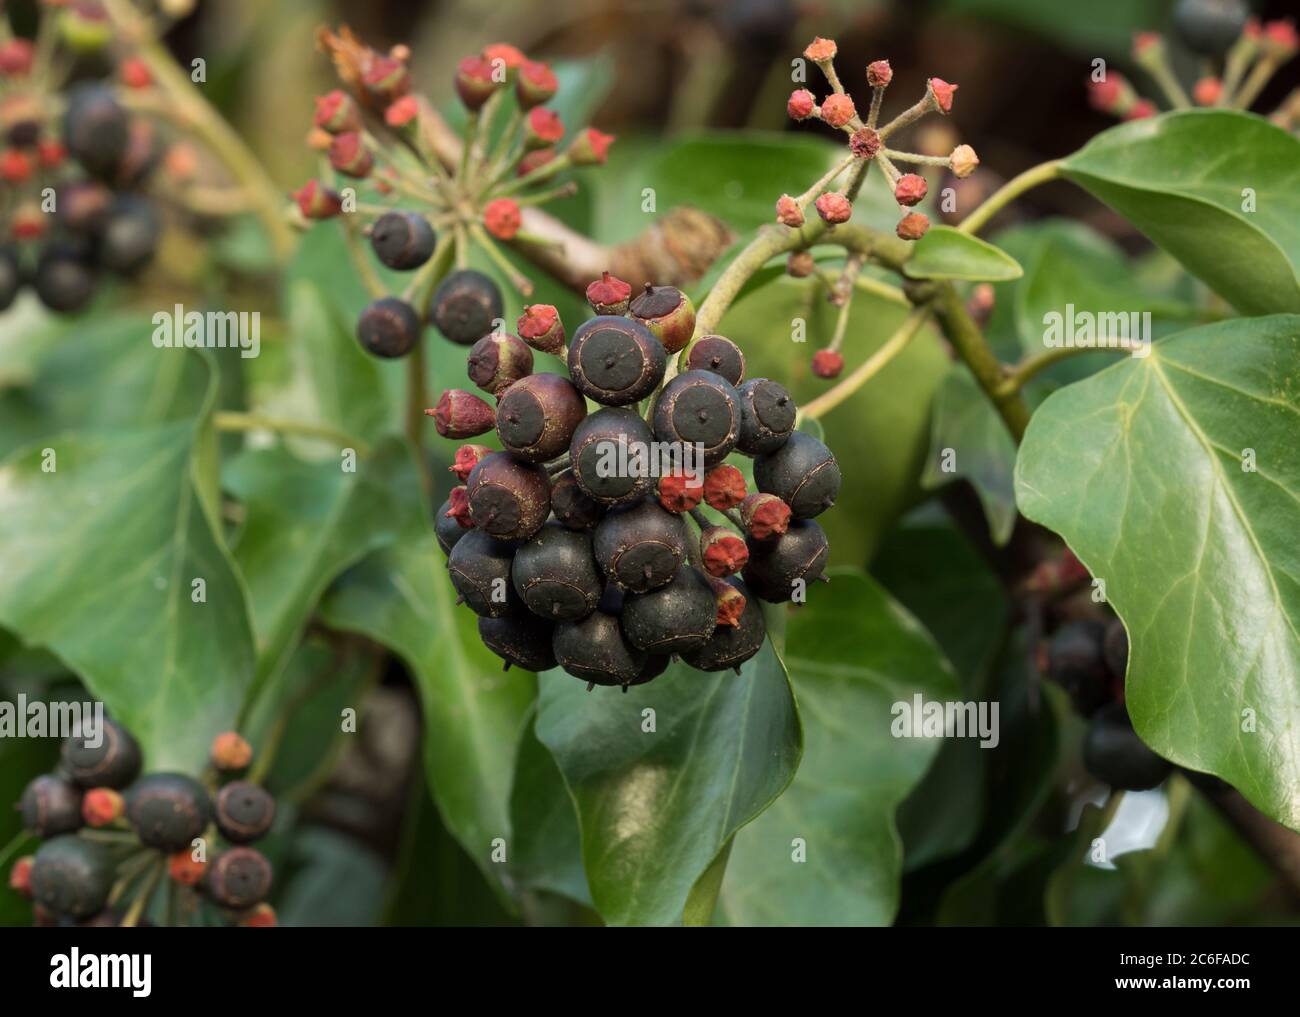 Ivy, Hedera helix, with berries. Taken February. Worcestershire, UK. Stock Photo